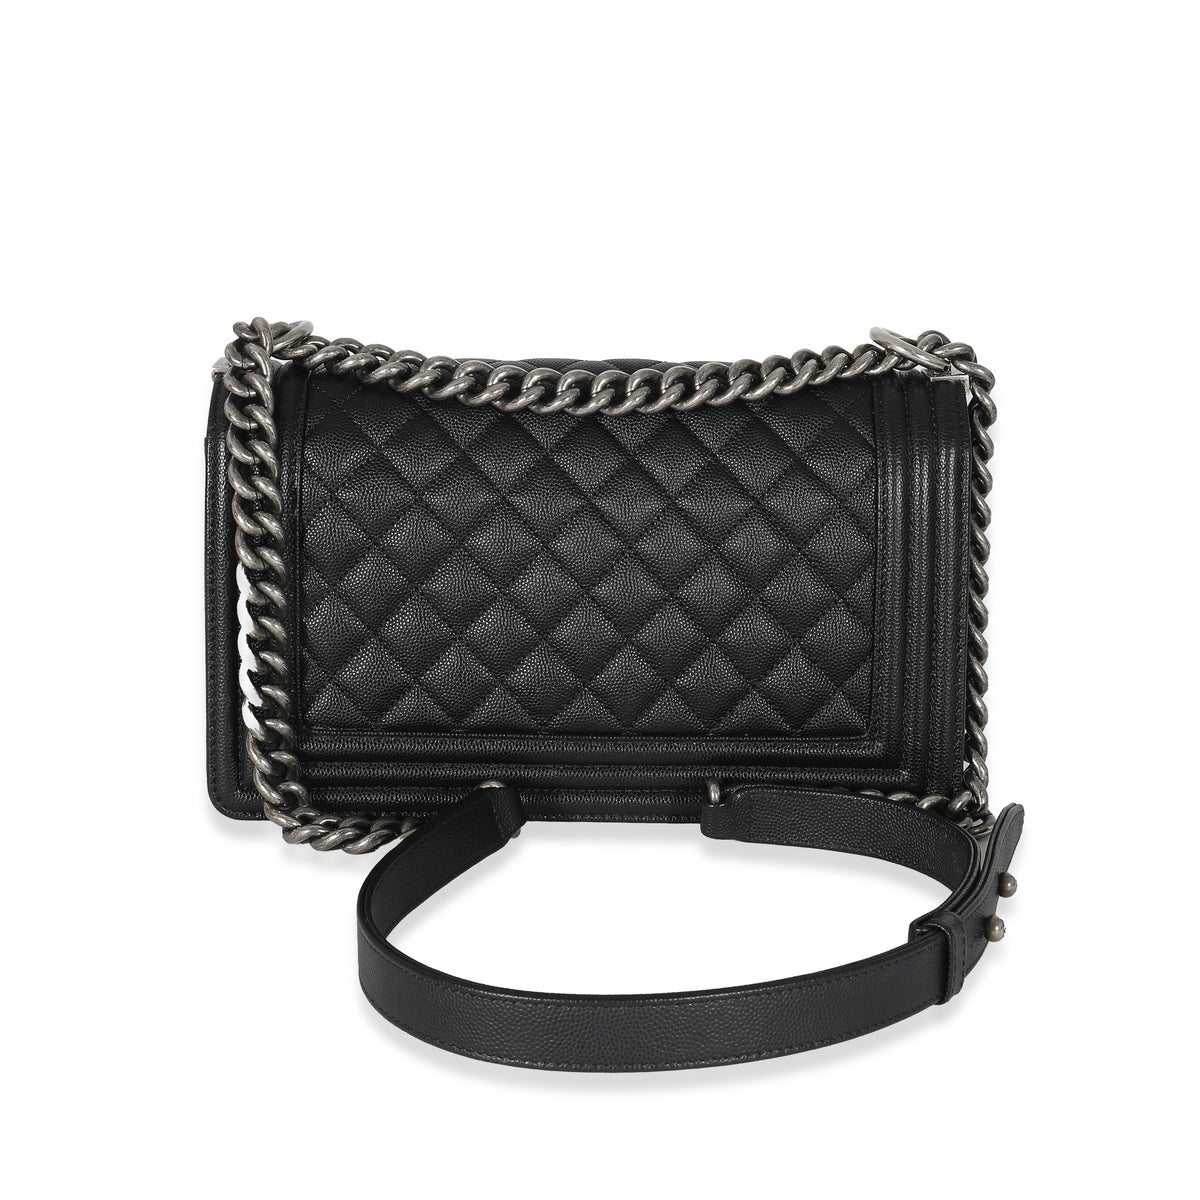 Chanel Black Quilted Caviar Jumbo CC Clutch Bag. Condition: 3. 12